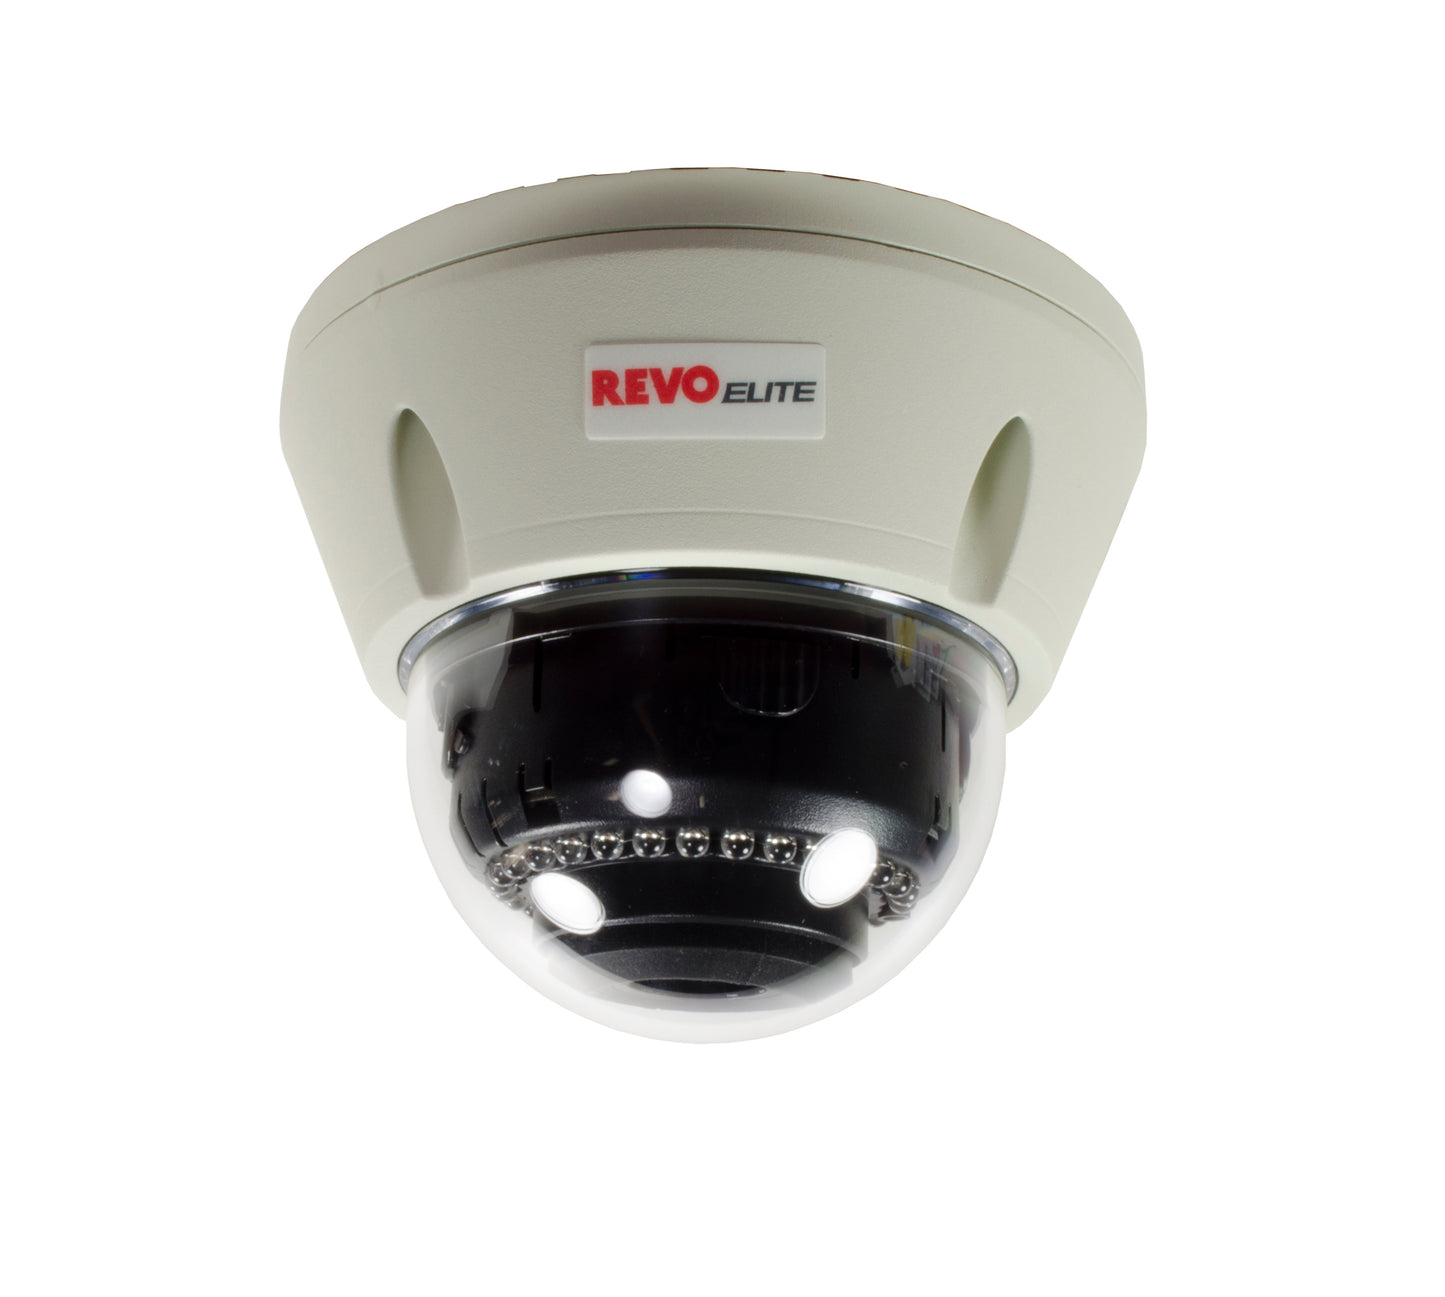 Elite Vandal Proof Dome Surveillance Camera with Night Vision